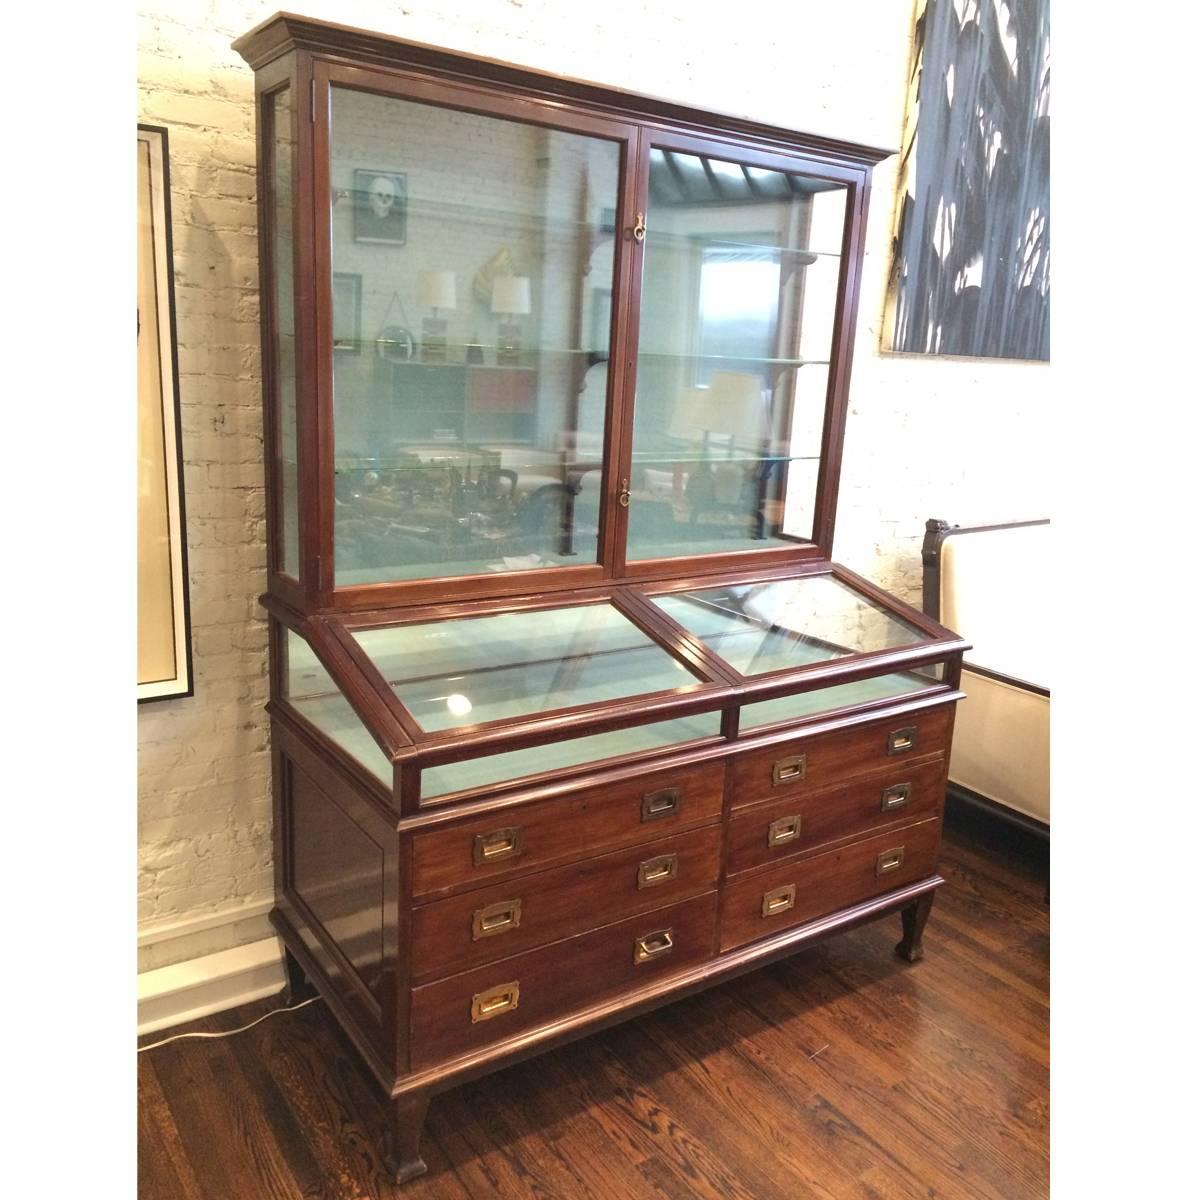 Large mahogany display case. Overall dimensions below. Upper cabinet measures 10